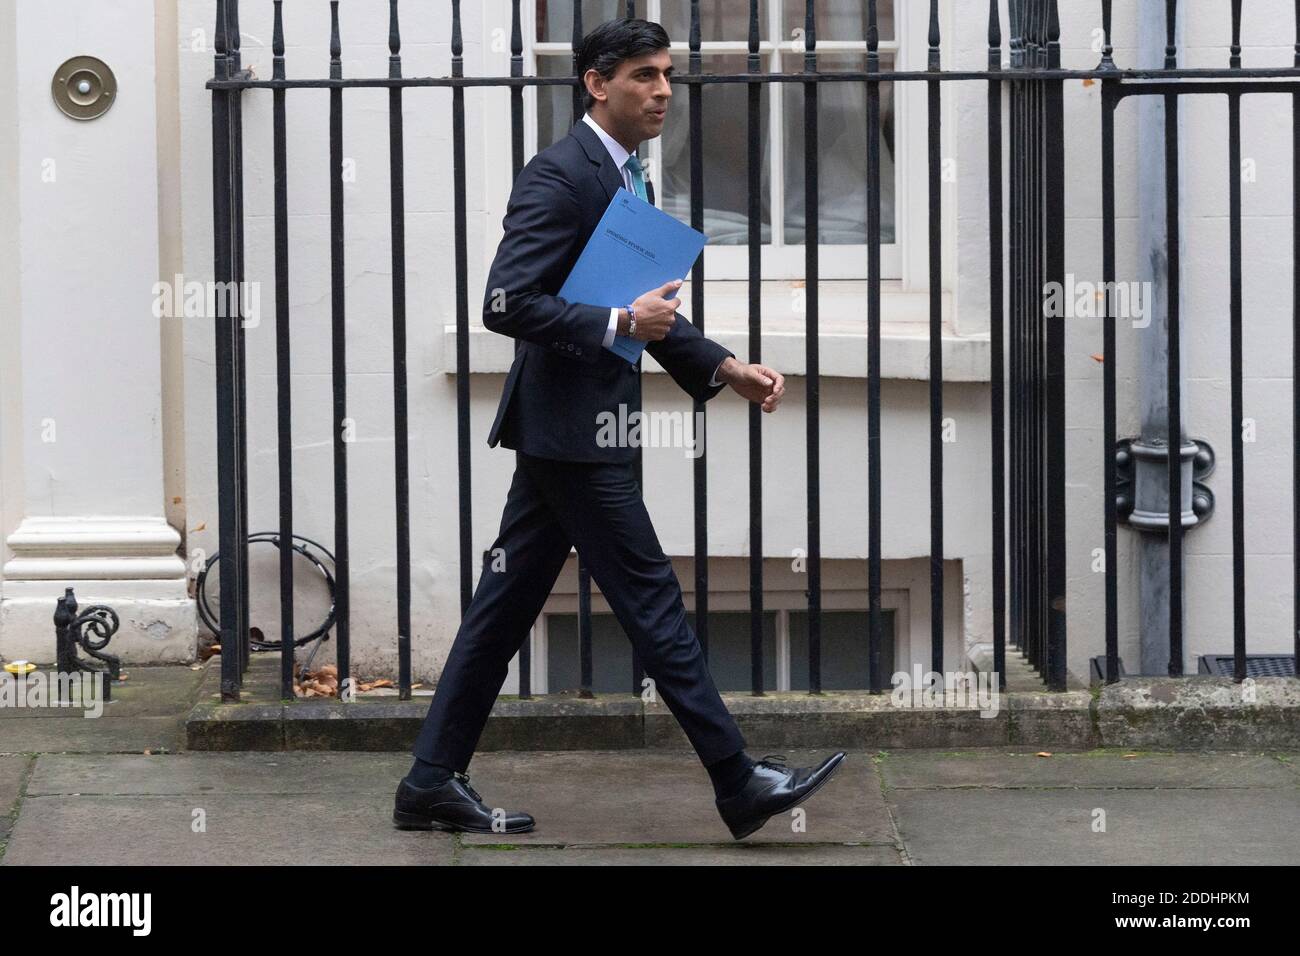 London, UK. 25th Nov, 2020. British Chancellor of the Exchequer Rishi Sunak leaves 11 Downing Street to unveil the Spending Review in London, Britain, on Nov. 25, 2020. The British economy is forecast to shrink by 11.3 percent this year, the worst recession in more than 300 years in the country as a result of the coronavirus crisis, Rishi Sunak said Wednesday. Credit: Xinhua/Alamy Live News Stock Photo